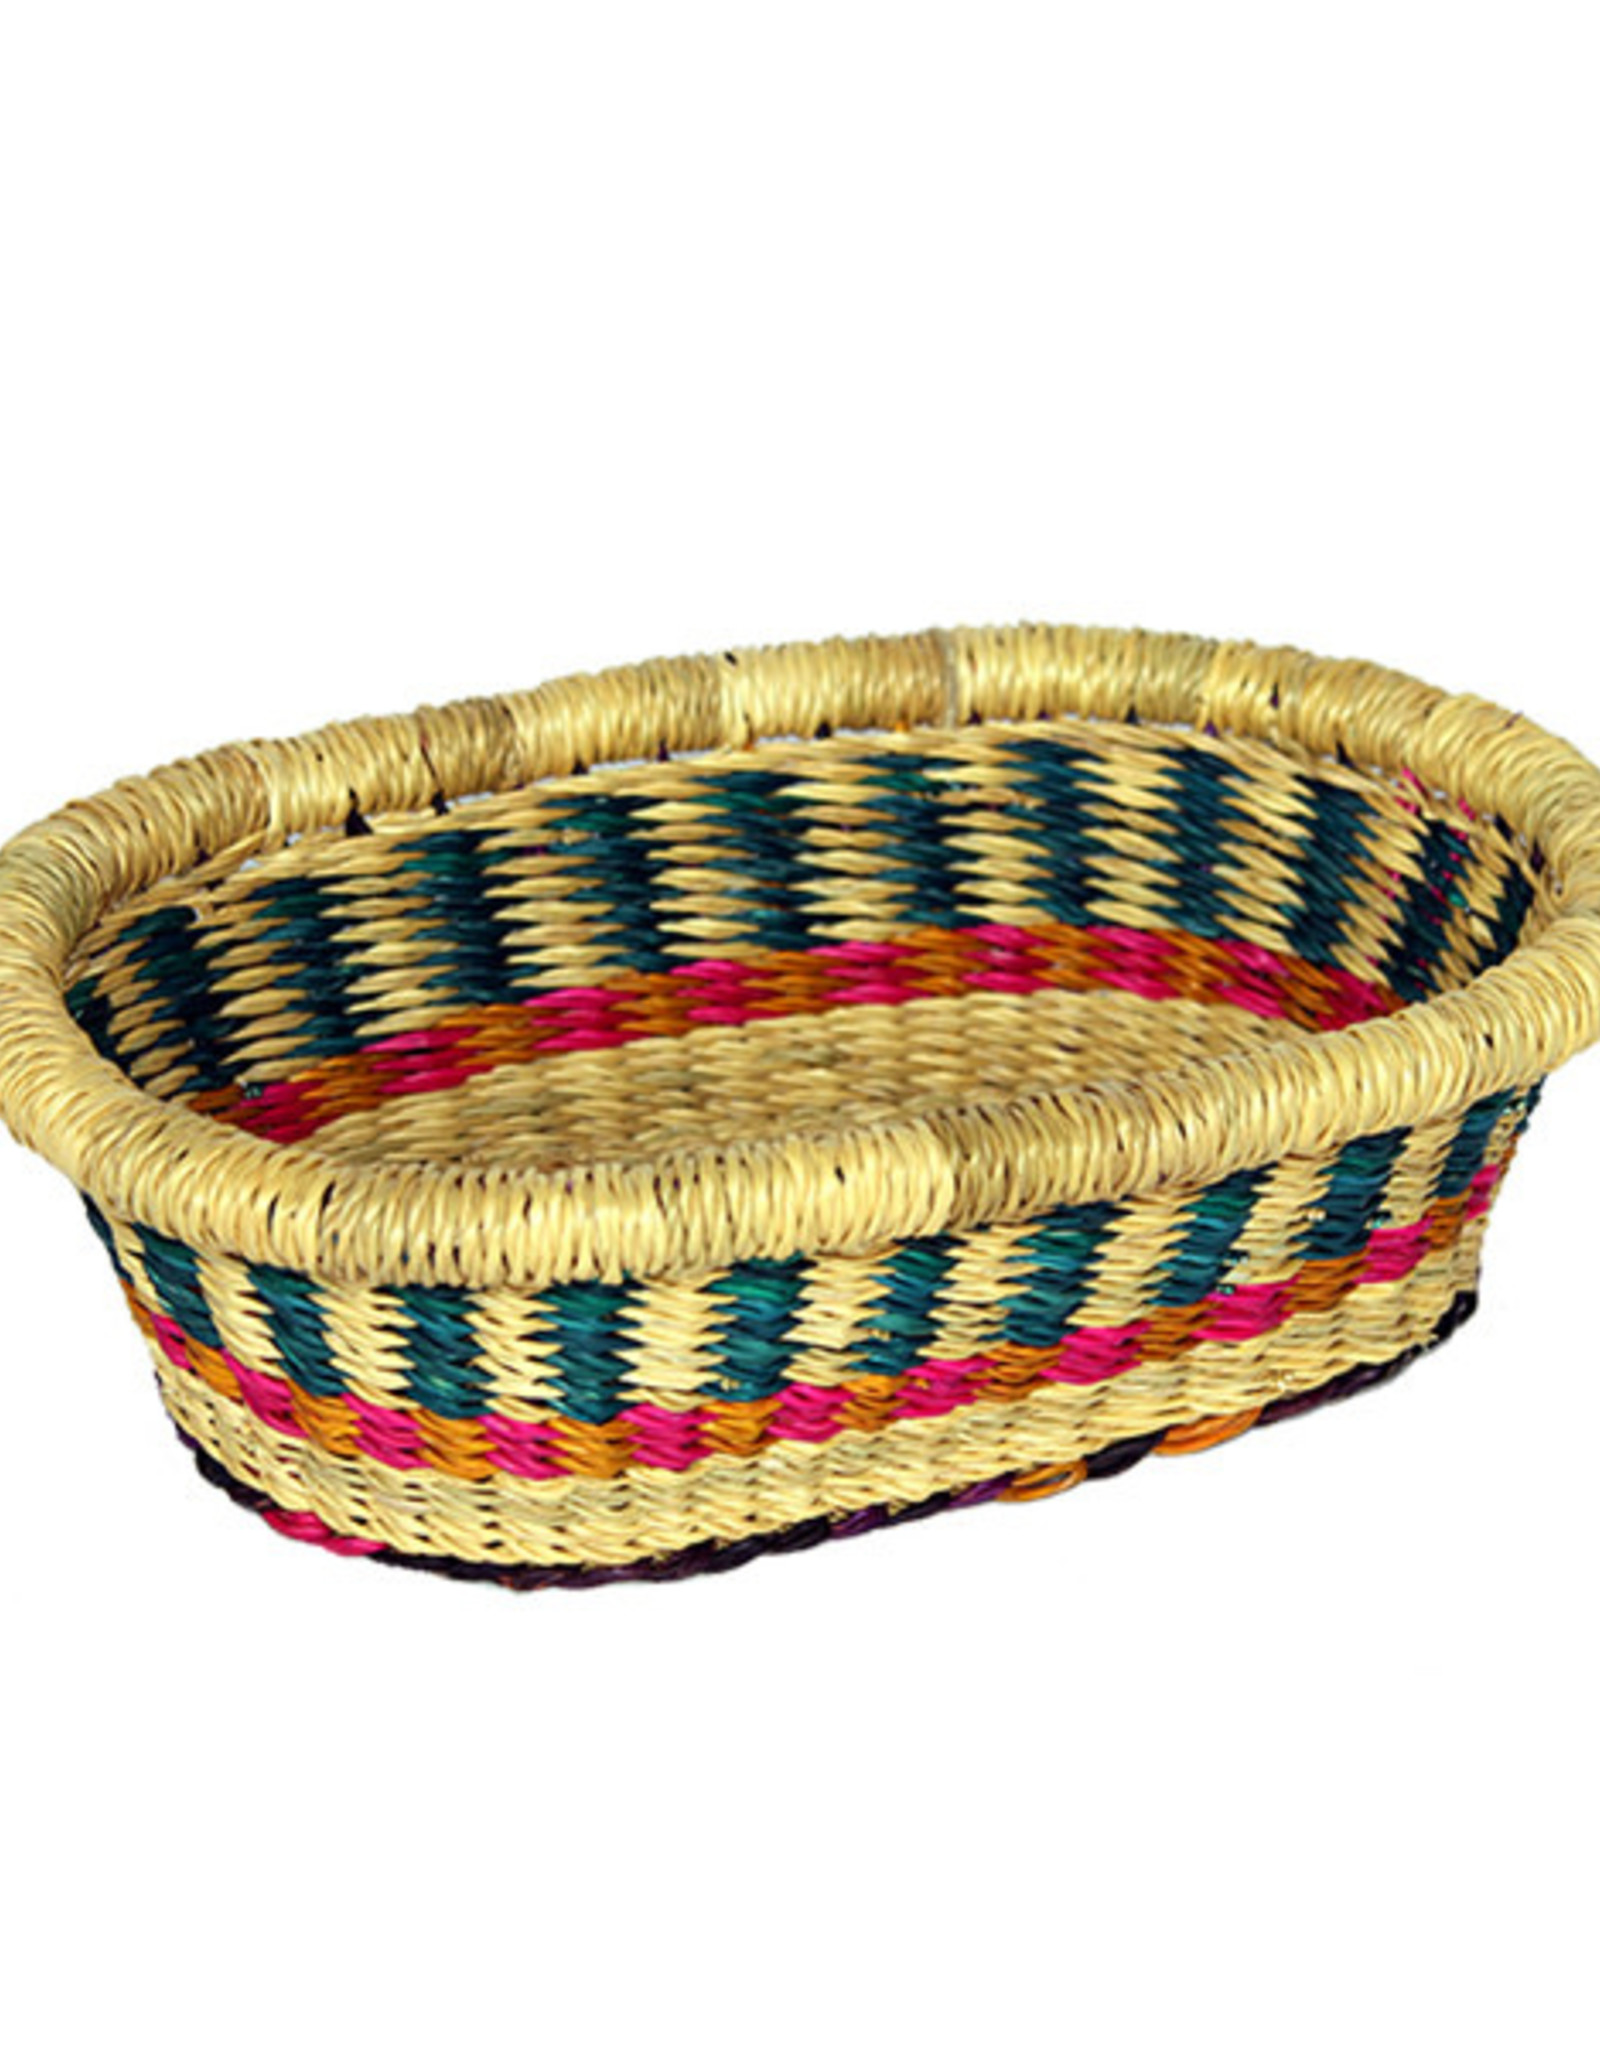 African Market Baskets Mini Oval Tray